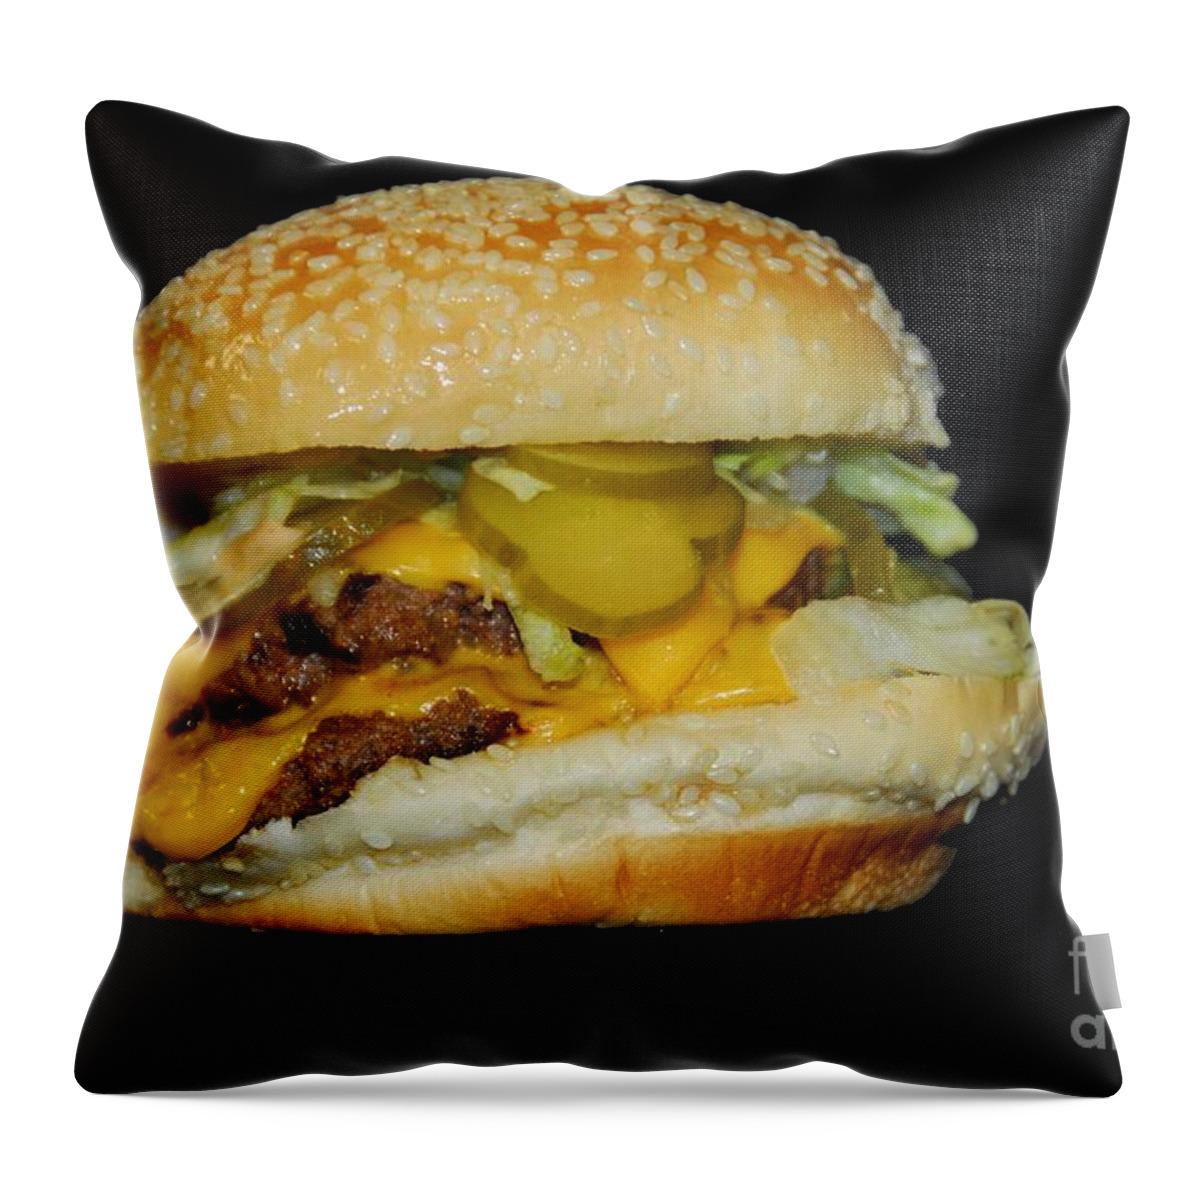 Burger Throw Pillow featuring the photograph Burgerlicious by Cindy Manero